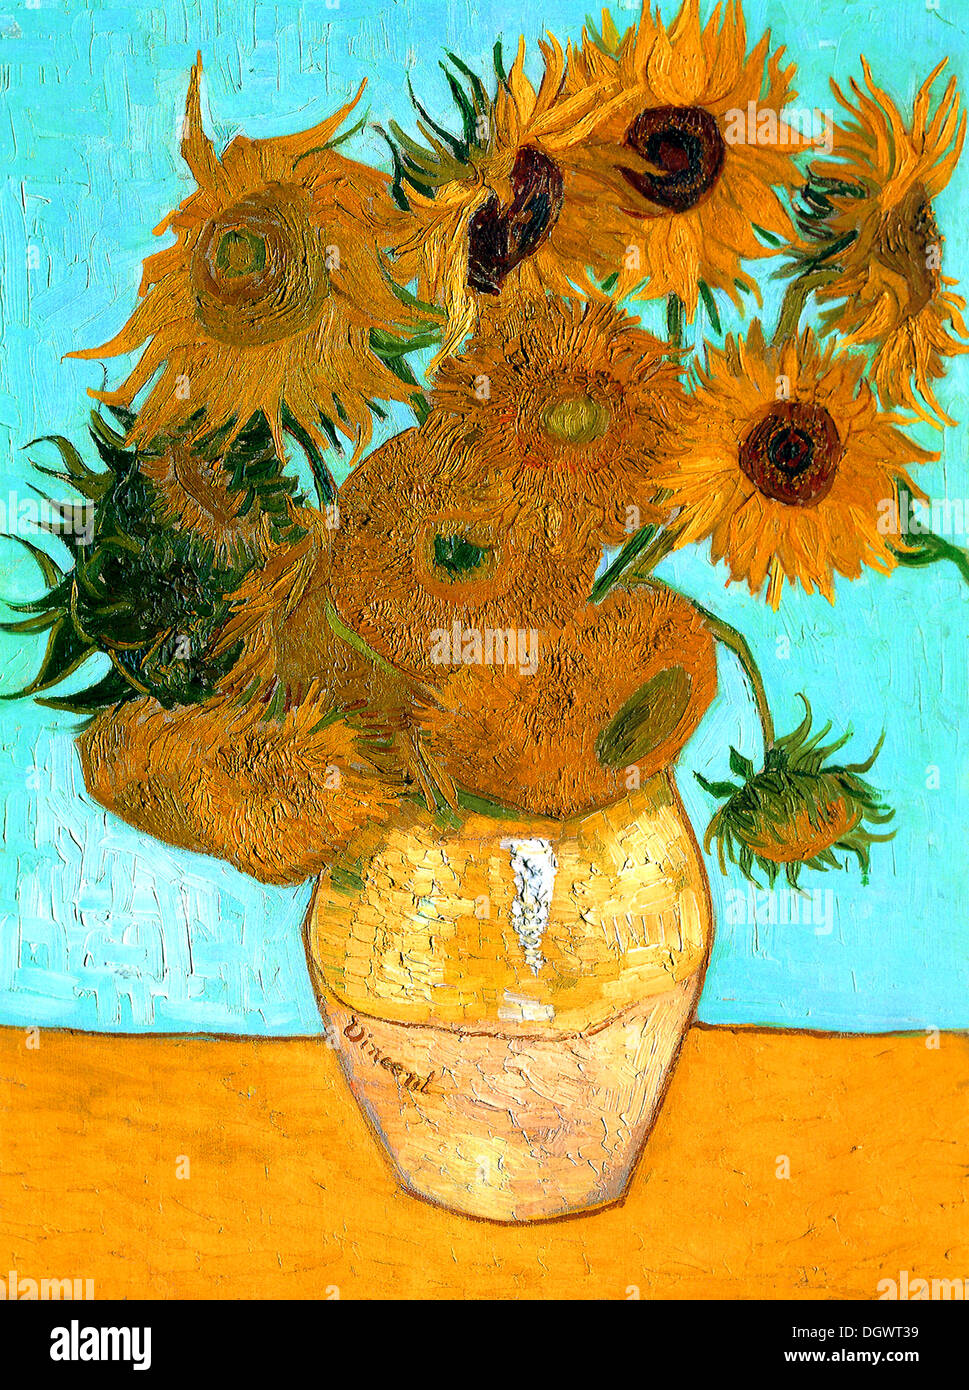 Sunflowers by Vincent van Gogh Stock Photo